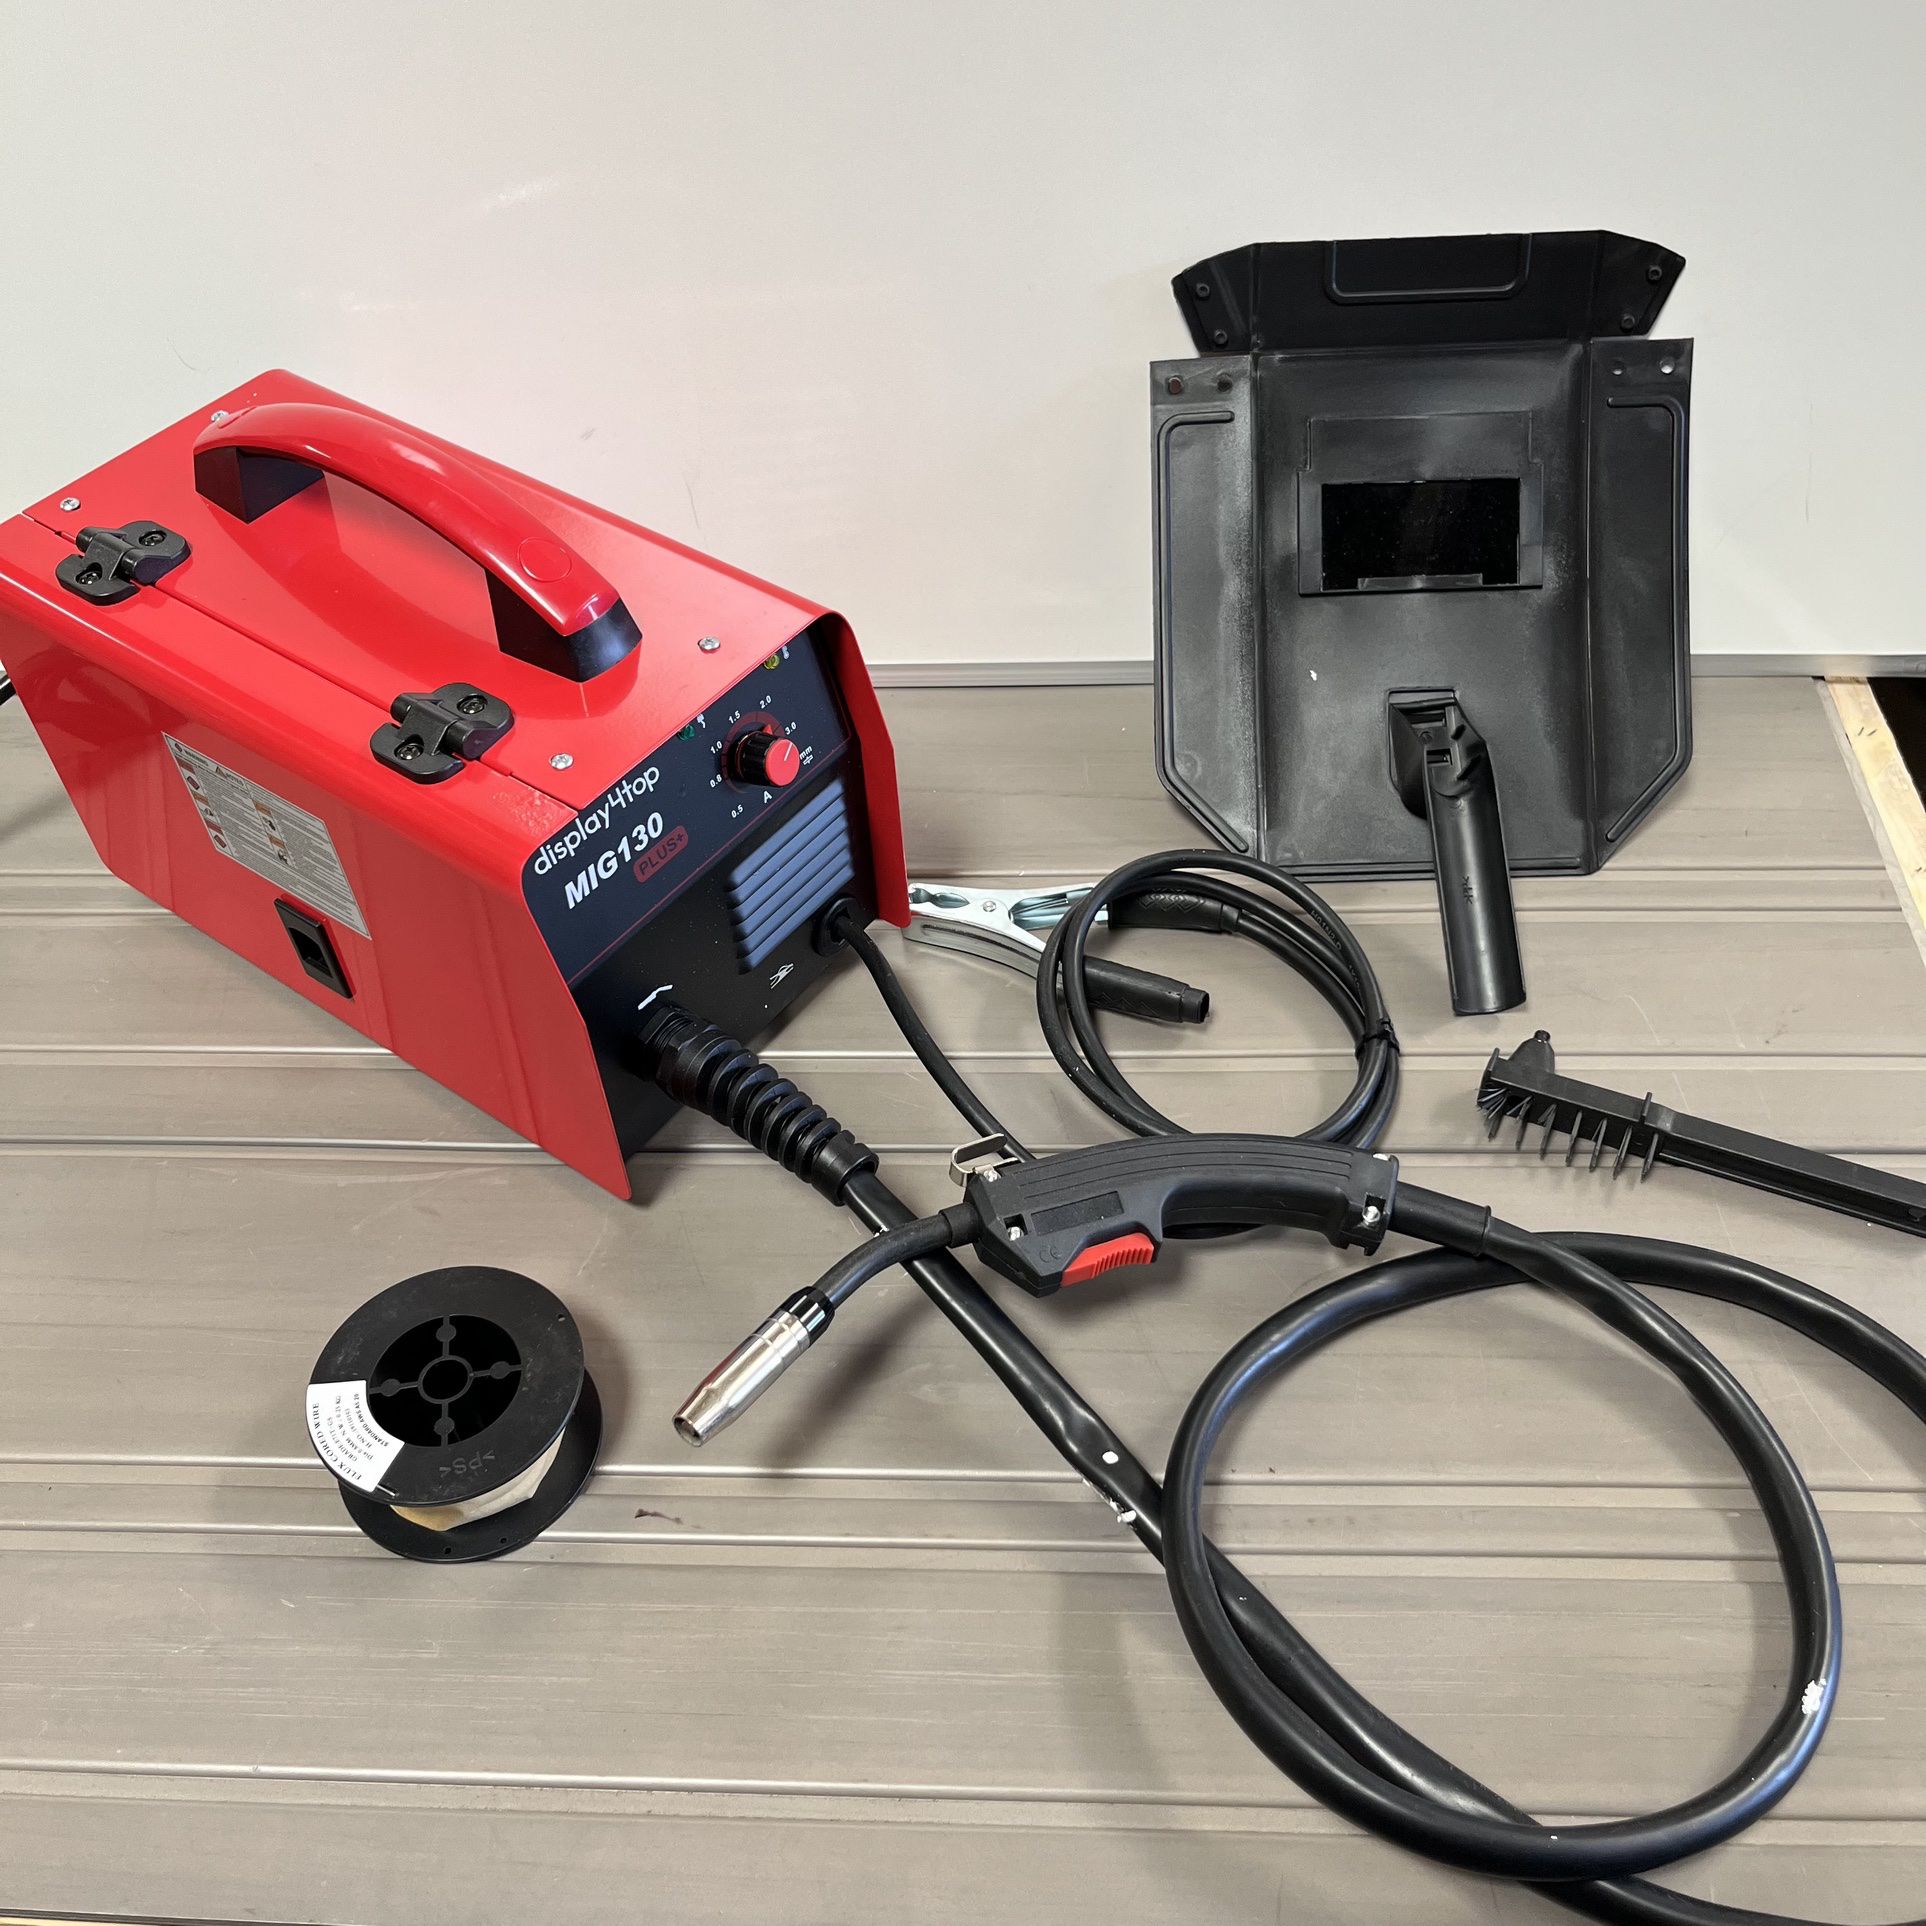 130A Portable Automatic Feed Welding Machine Flux Core Wire MIG Welder, 110V